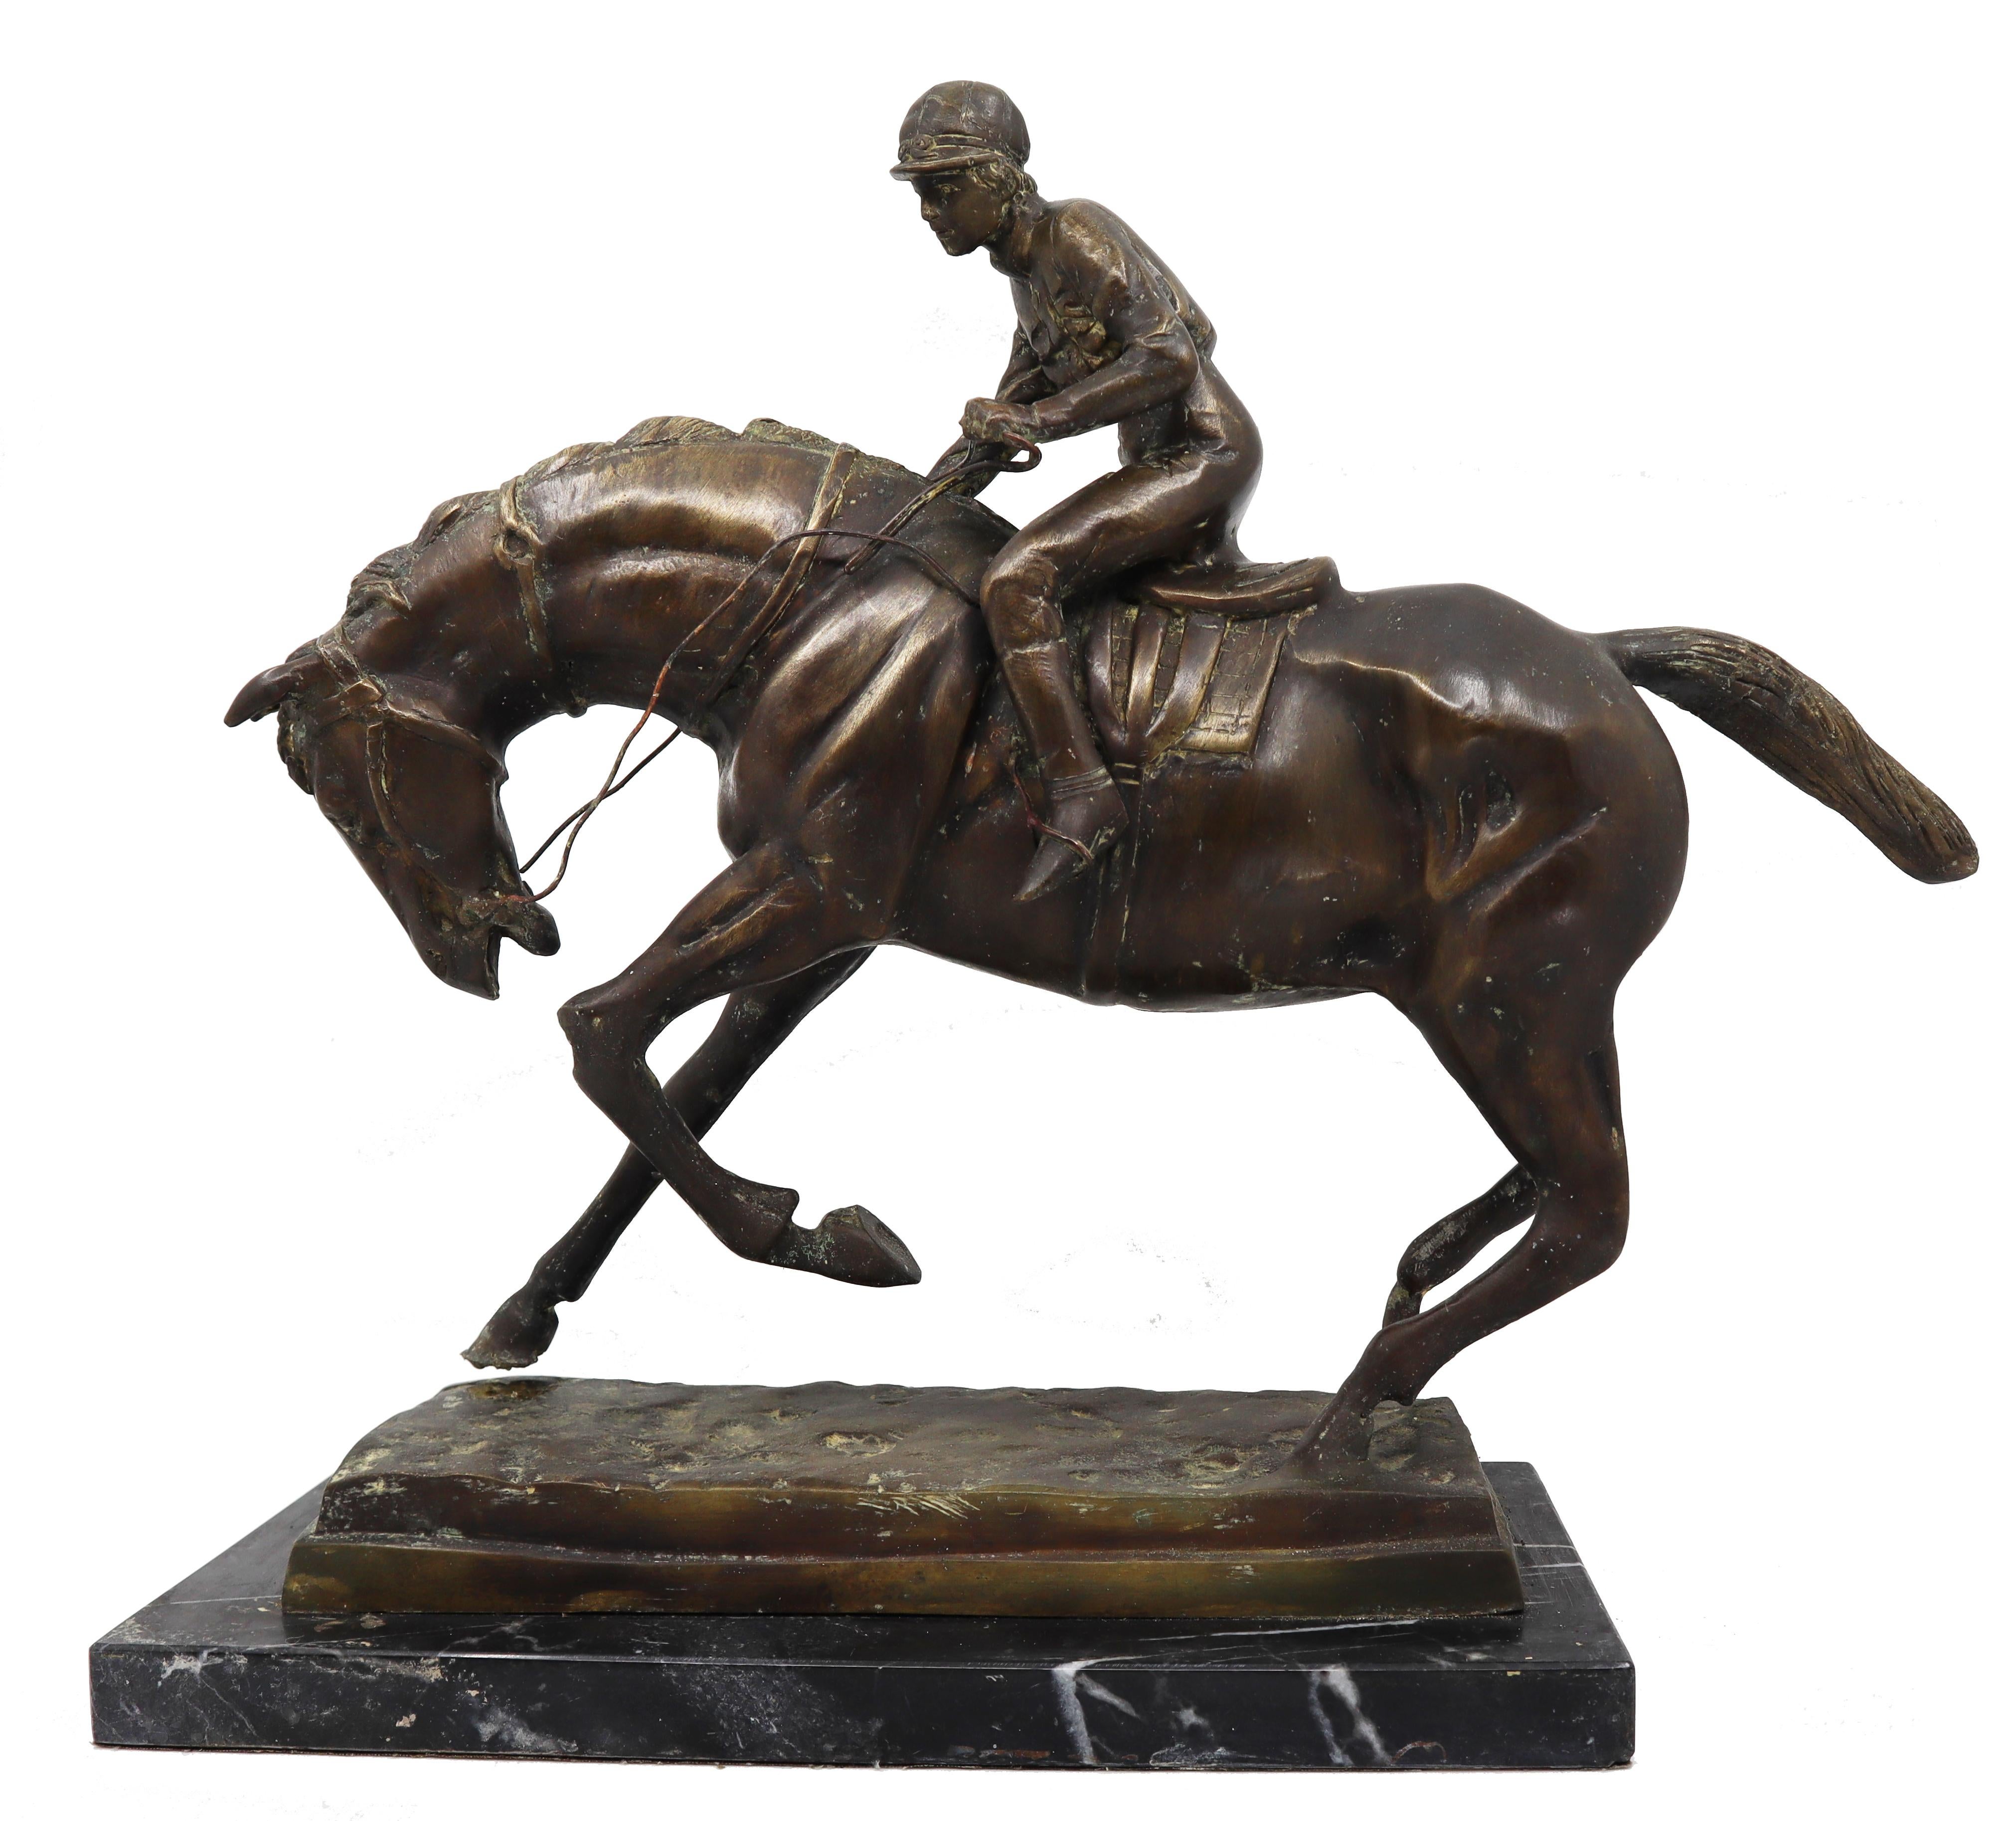 A bronze equestrian statue of a Jockey on his horse 19 century - Sculpture by Unknown